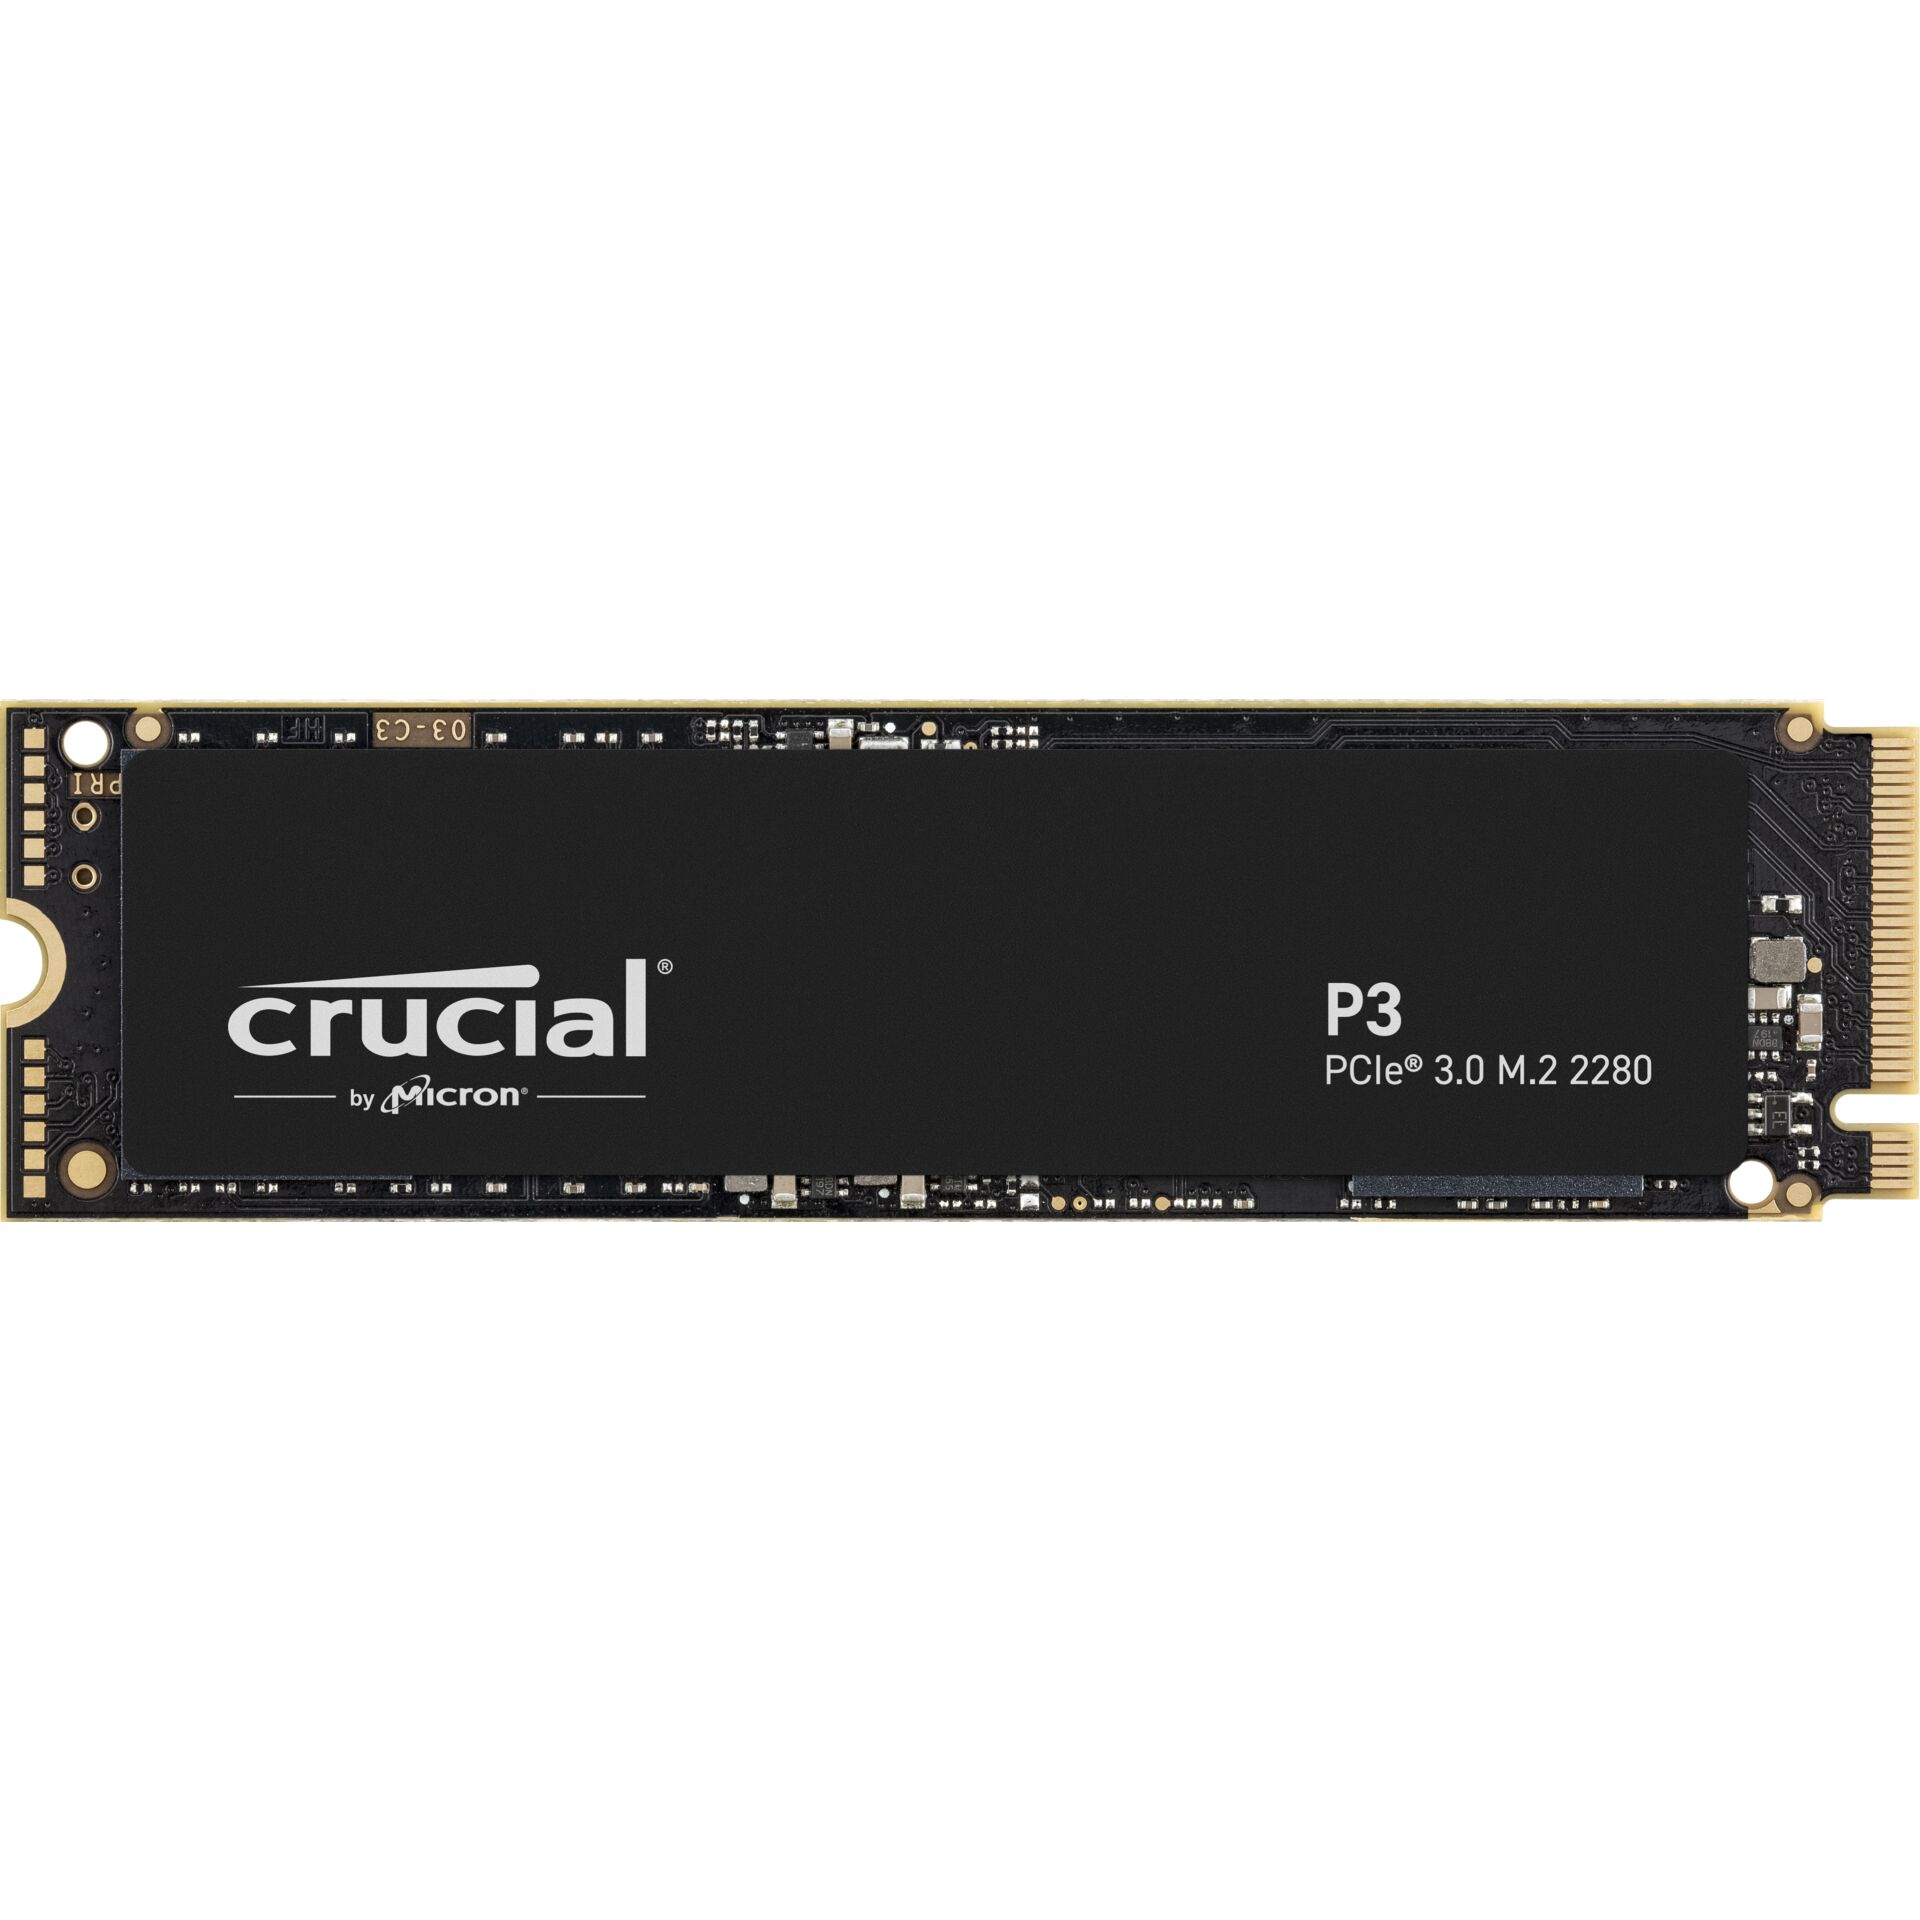 1.0 TB SSD Crucial P3 SSD, M.2/M-Key (PCIe 3.0 x4), lesen: 3500MB/s, schreiben: 3000MB/s SLC-Cached, TBW: 220TB